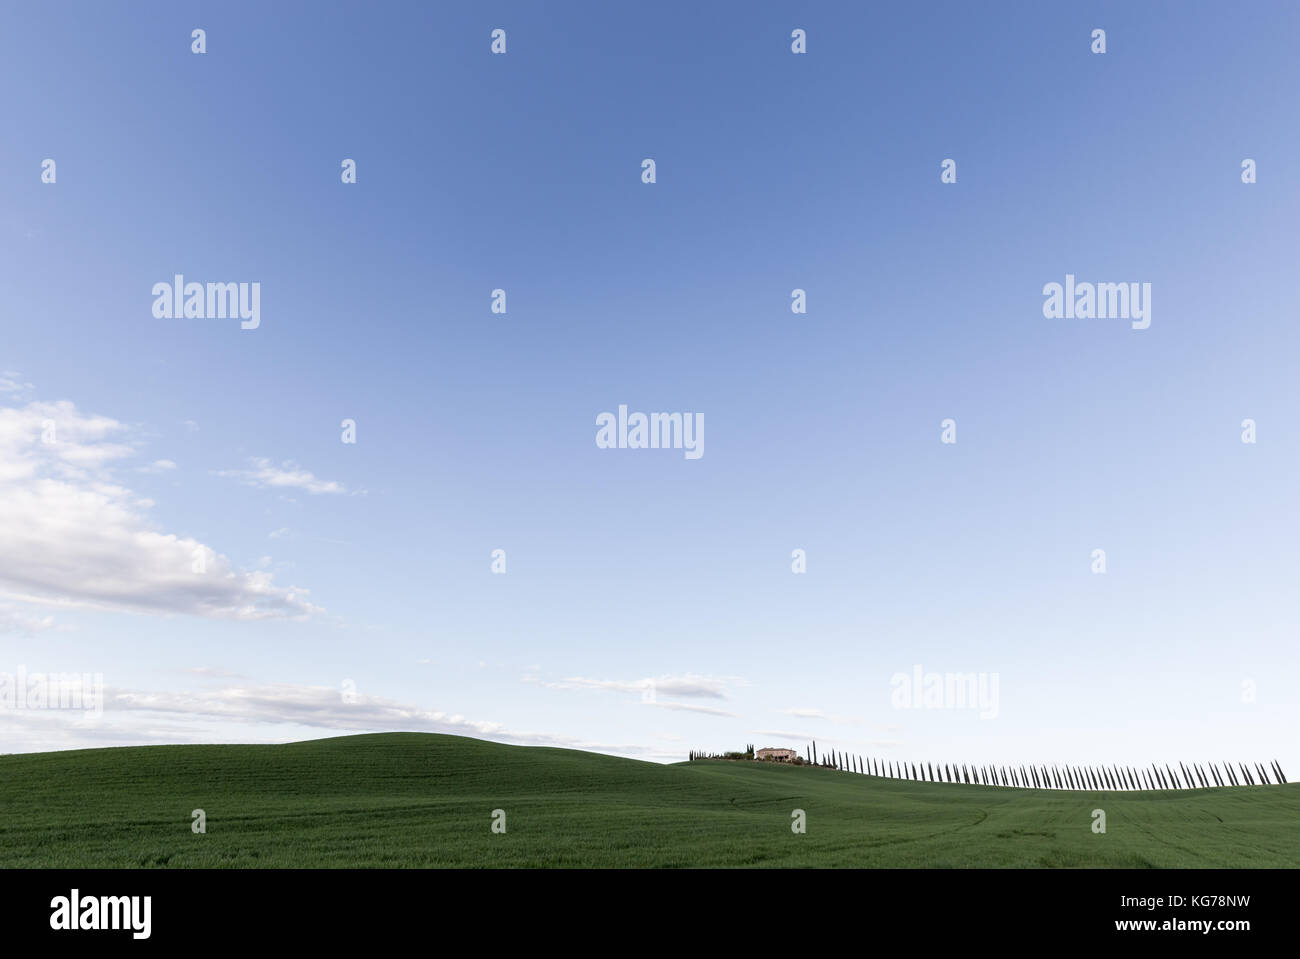 Minimalism view of  green hills and a rural house with a long line of cypresses in Tuscany, beneath a blue, almost empty sky Stock Photo